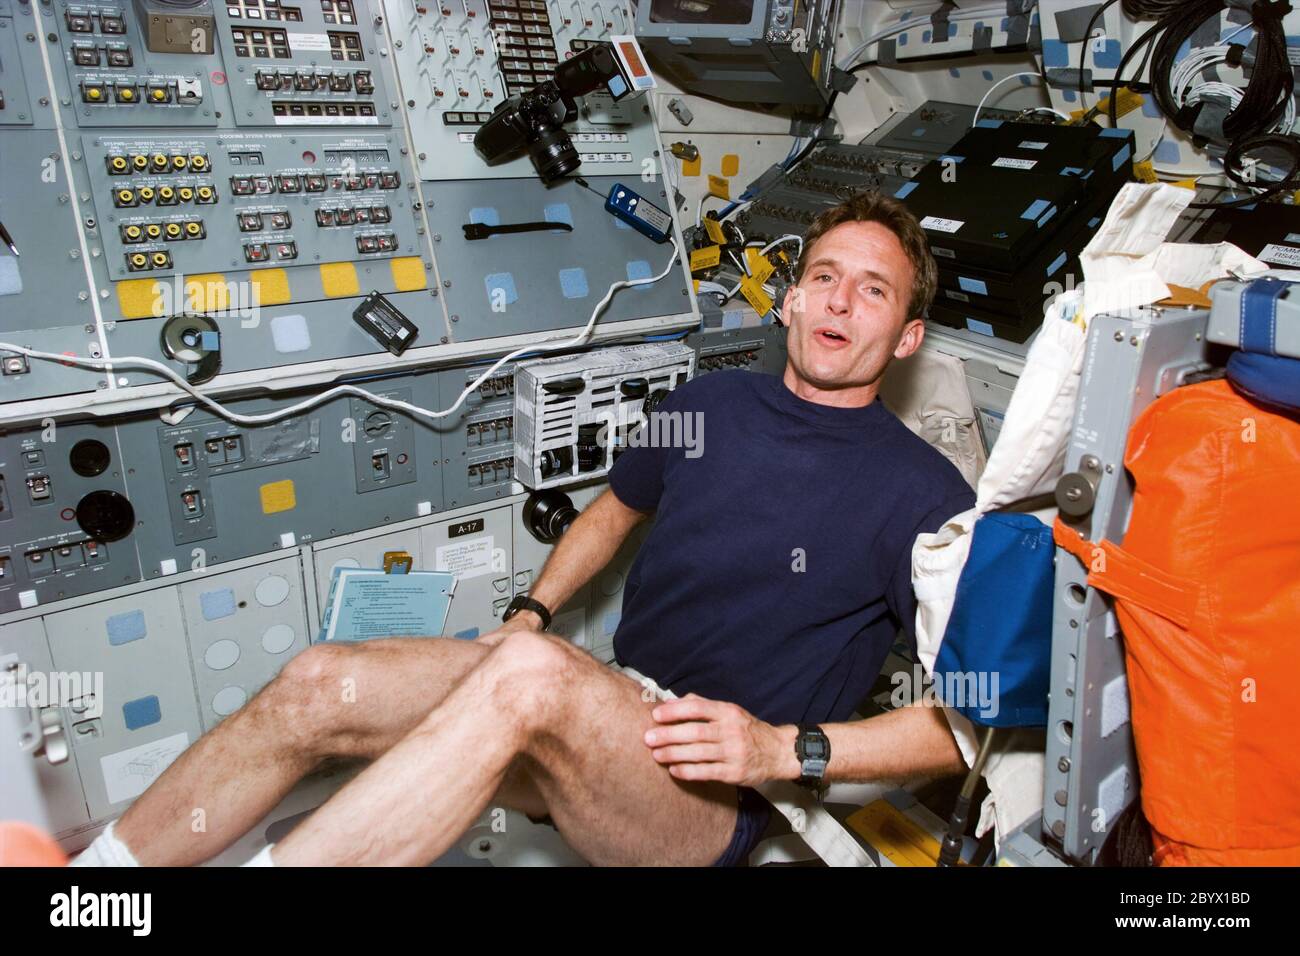 (12 Jan. 1997) --- Astronaut Jerry M. Linenger, mission specialist, works out on a bicycle ergometer device on the Space Shuttle Atlantis' flight deck as he readies for a long-duration stay in Earth-orbit. In mid-week, Linenger and his crew mates are scheduled to dock with Russia's Mir Space Station and pick up John E. Blaha, NASA astronaut who has been serving as a cosmonaut guest researcher since September 1996. Linenger will replace Blaha onboard Mir and the transfer will mark the second such direct exchange of cosmonaut guest researchers, though Linenger will be the fourth United States as Stock Photo